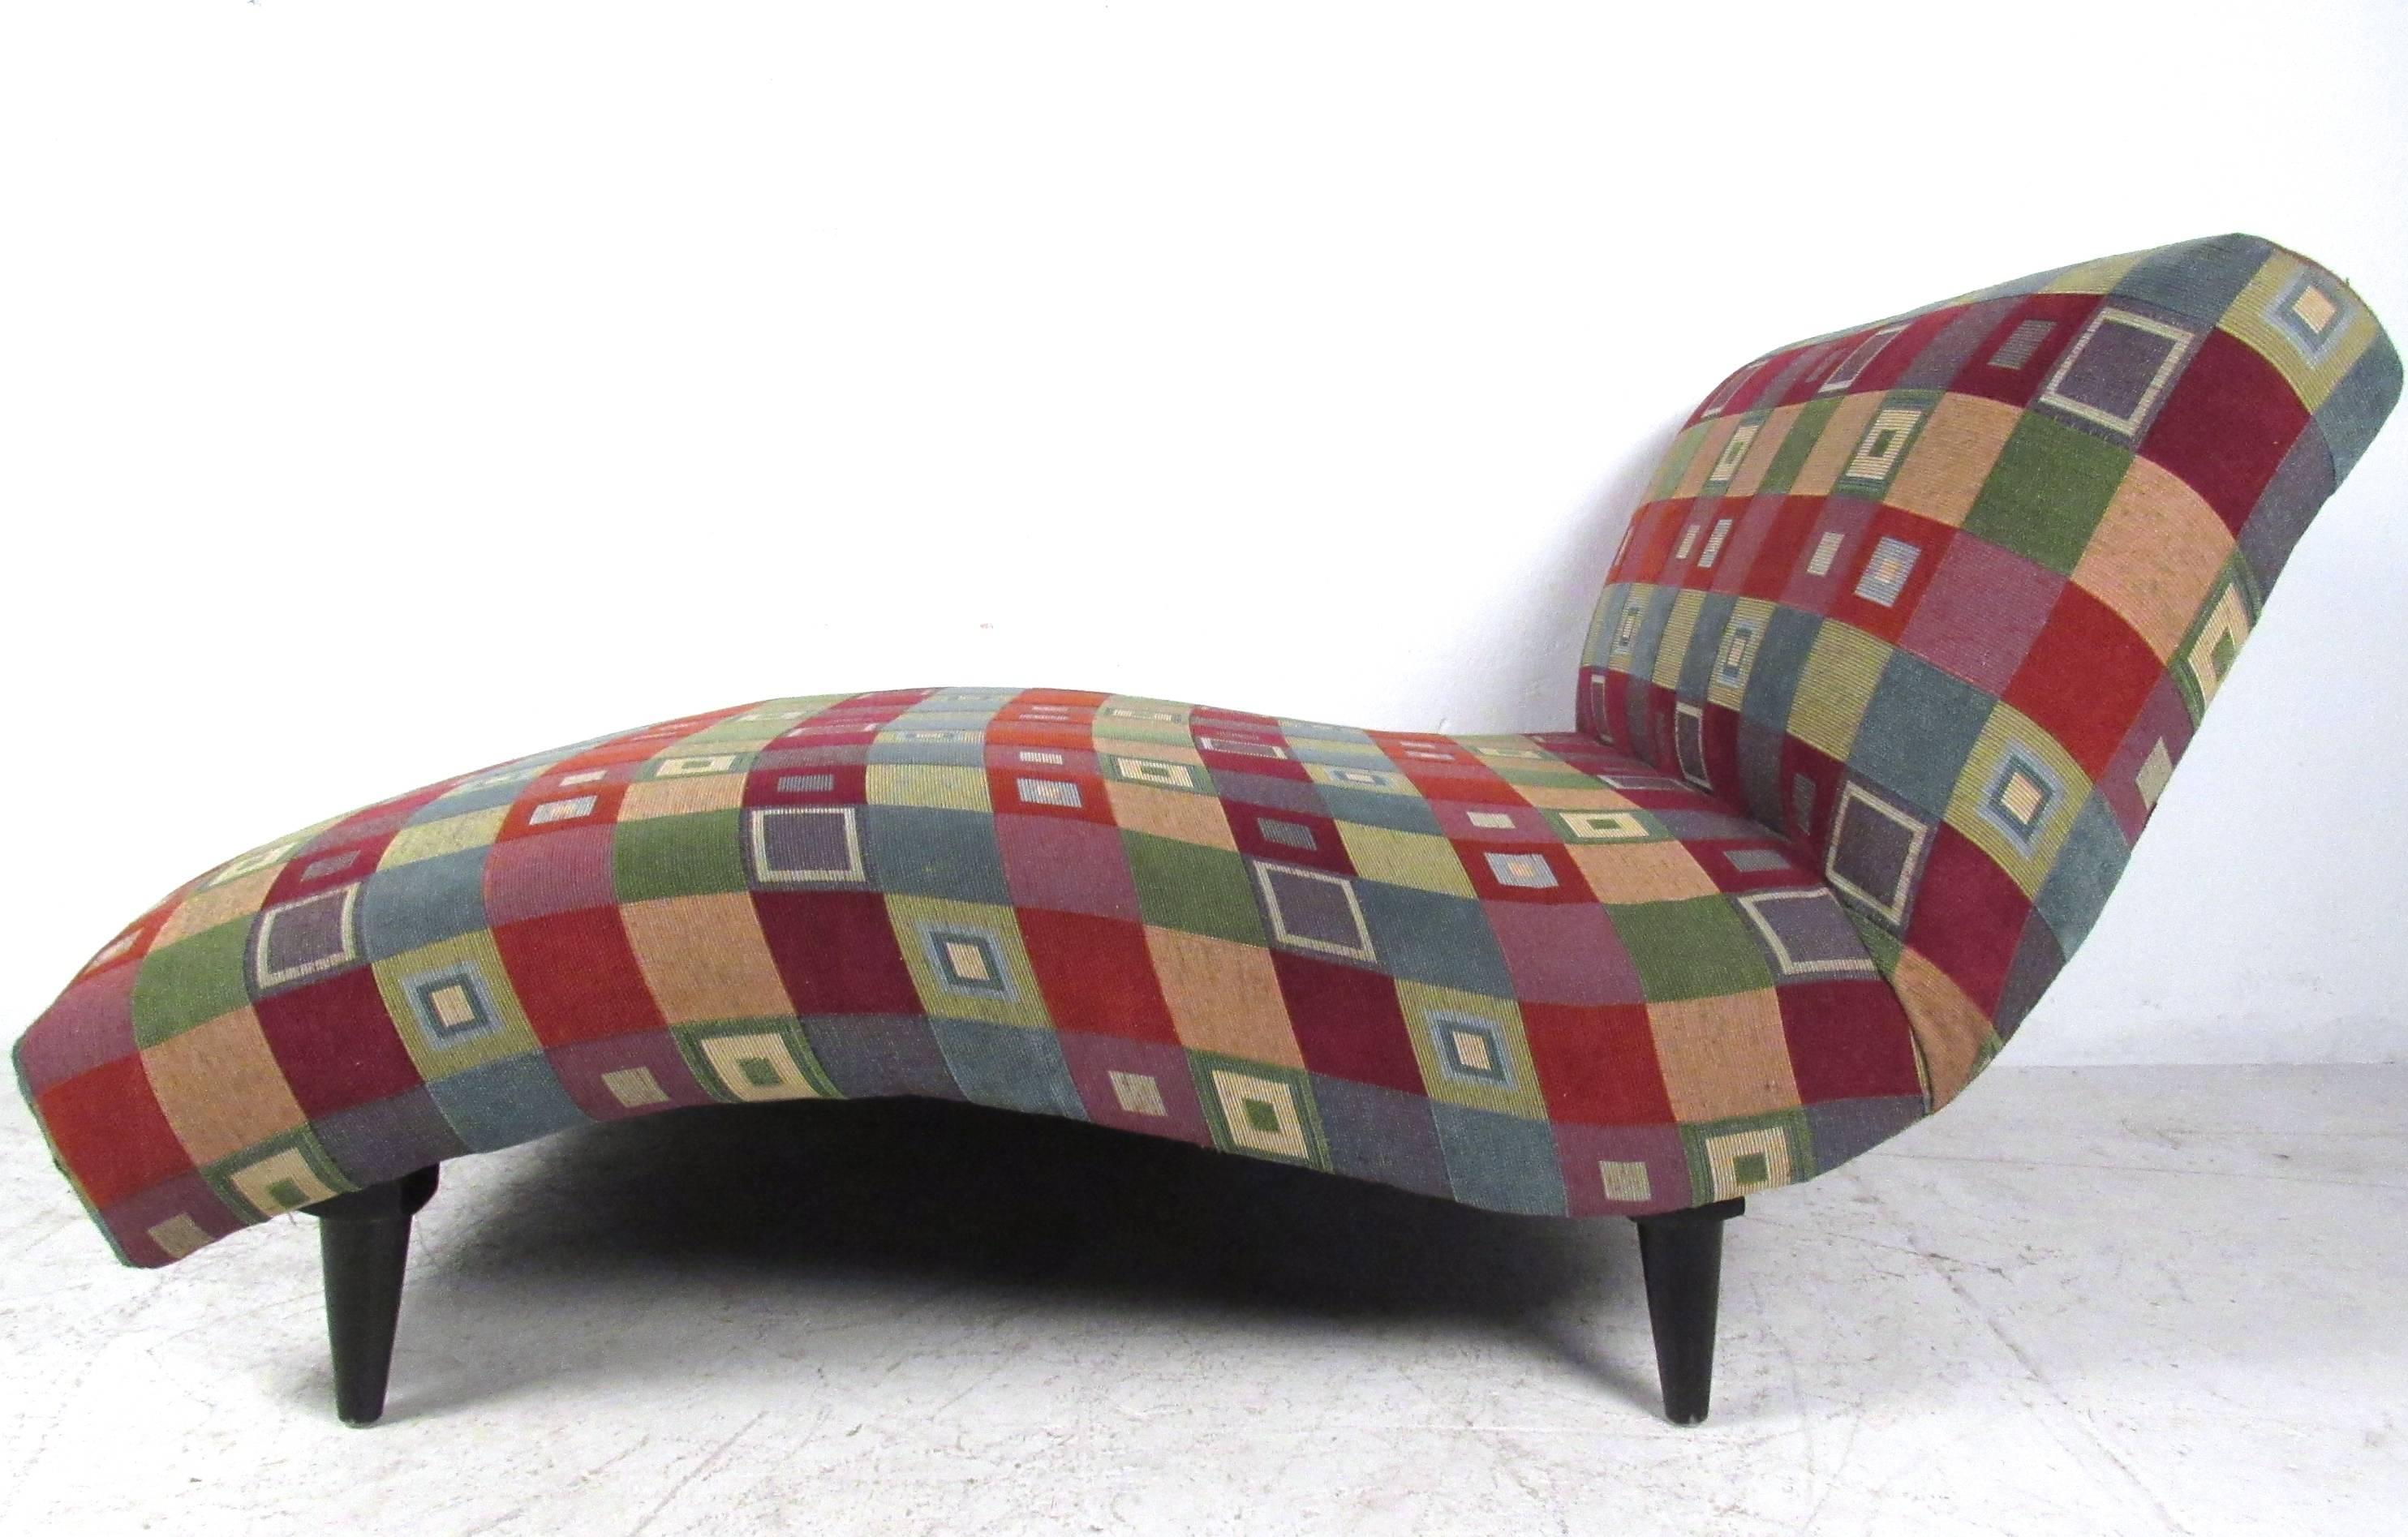 This comfortable and stylish chaise longue makes a wonderful vintage seating addition to any interior. Wide frame, contemporary upholstery, and tapered legs make this a unique reclined seating option for up to two people. Please confirm item